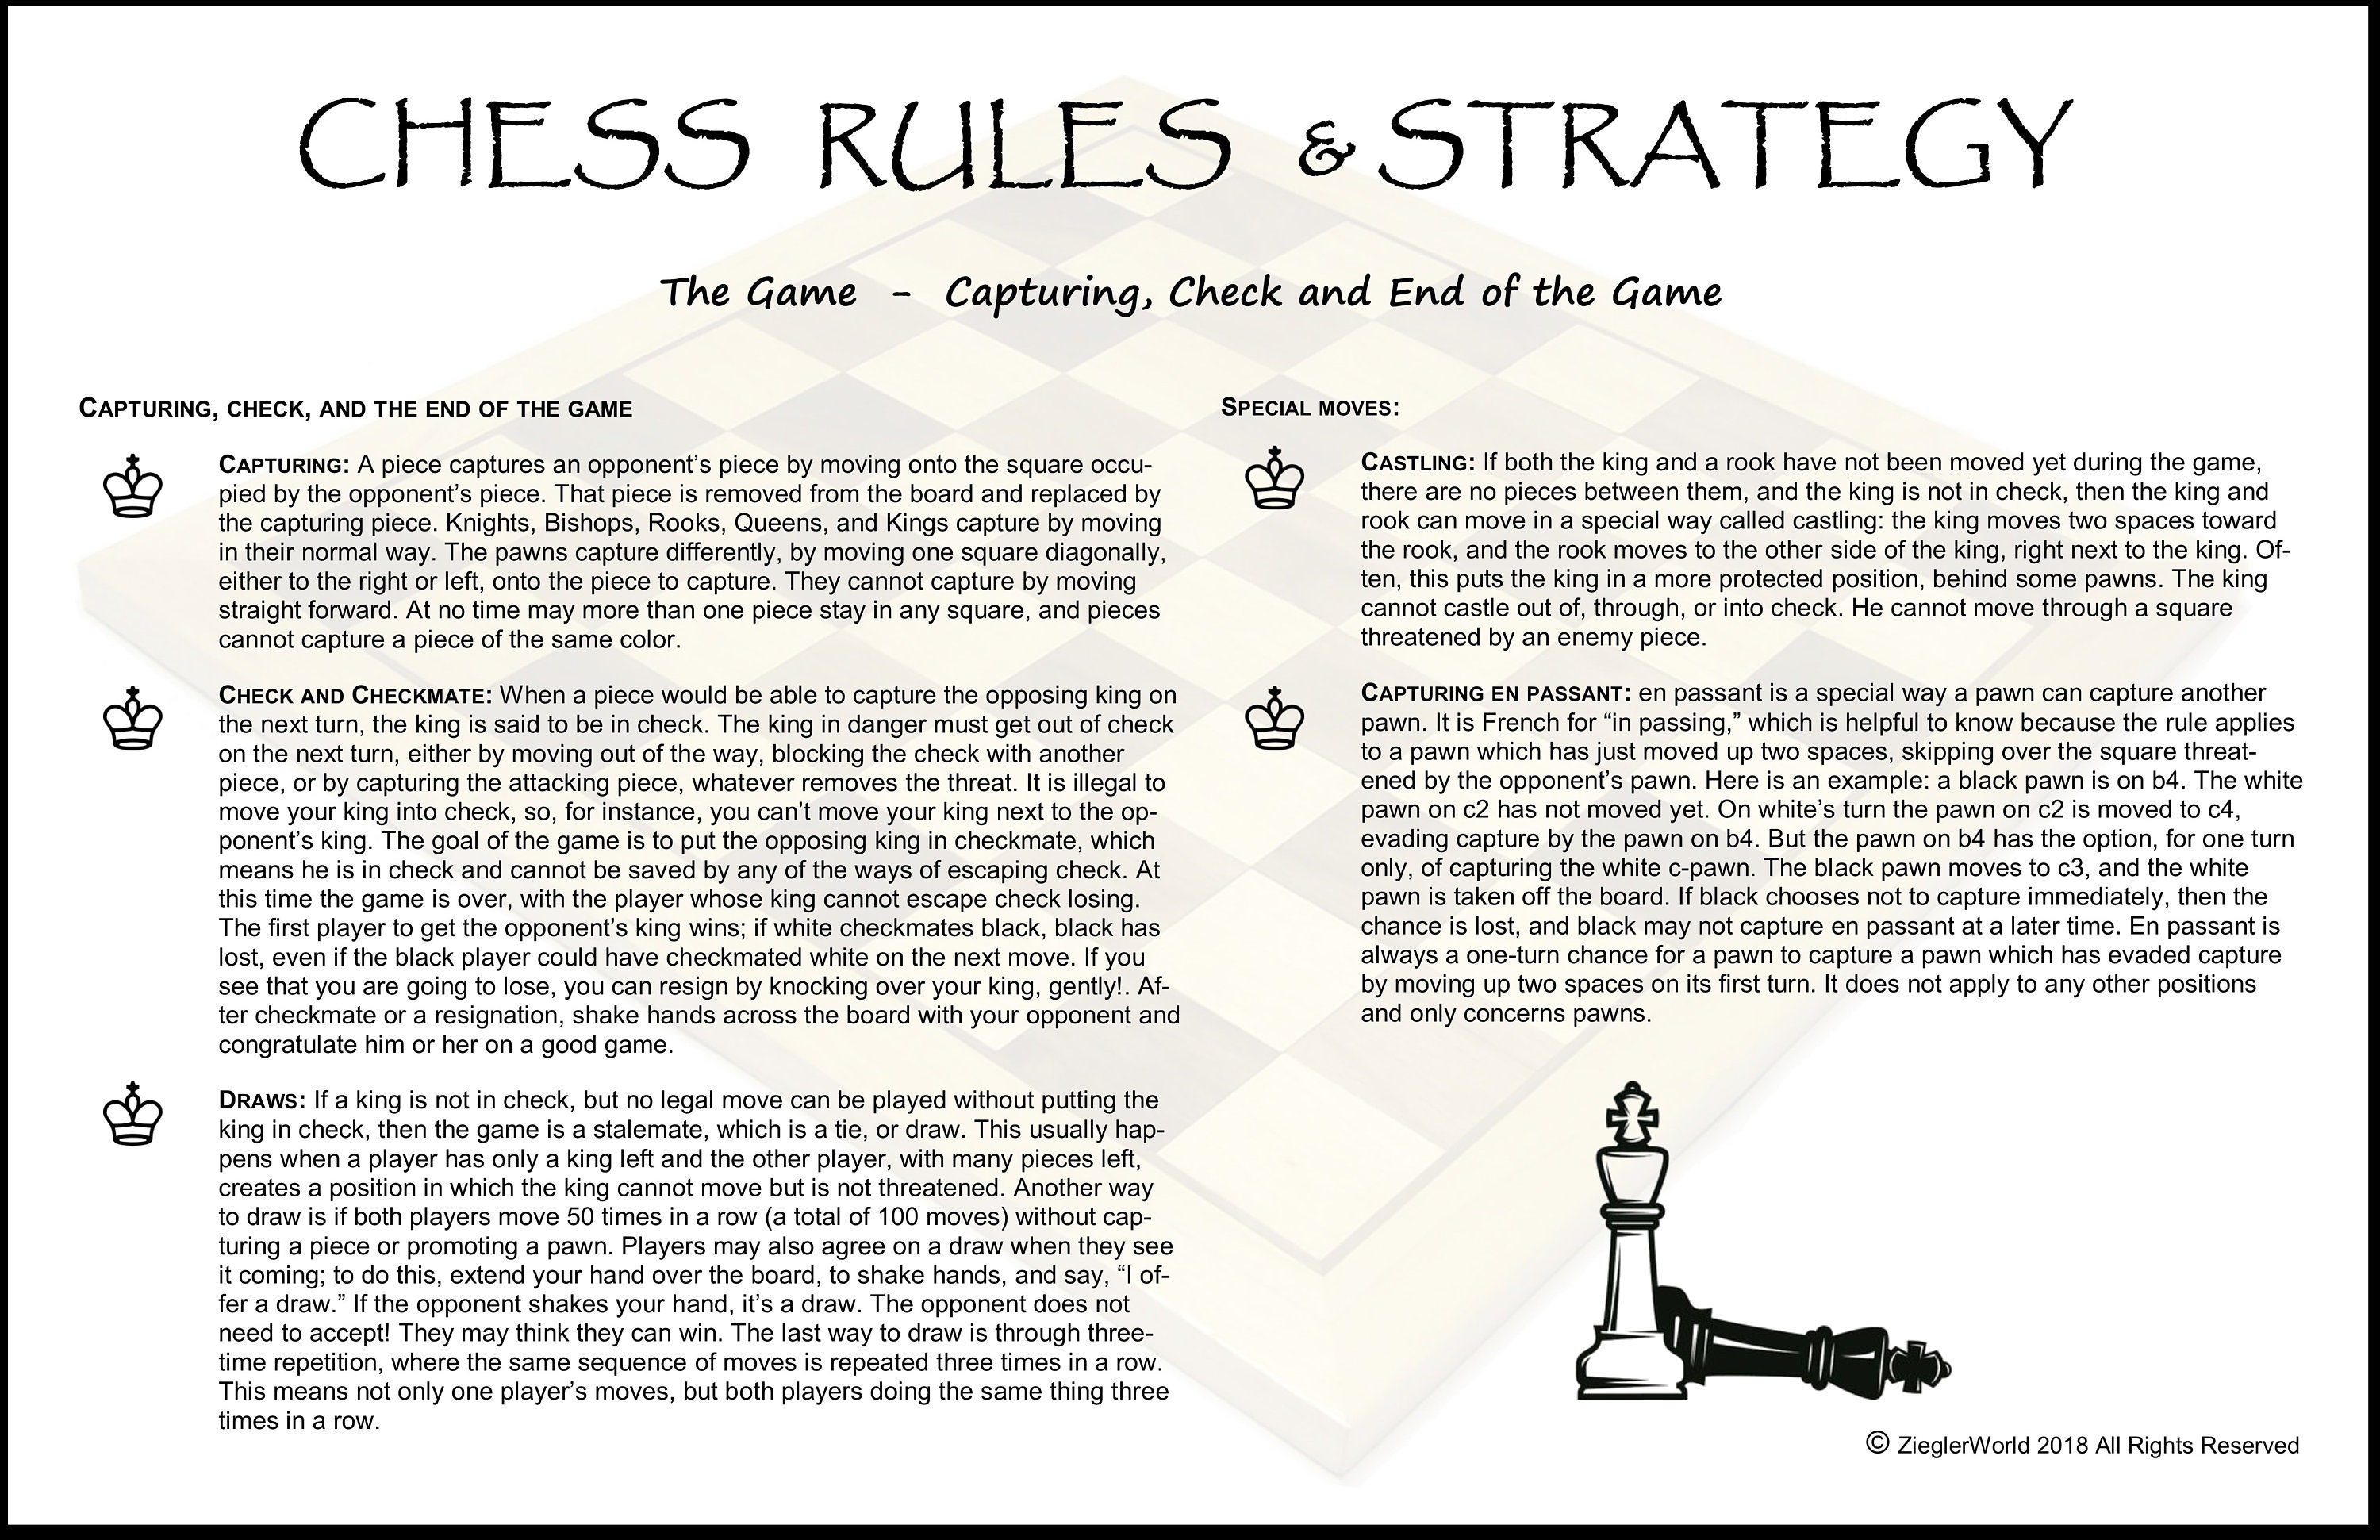 Basics Chess Strategy and Illustrated Guide to Chess Pieces : Know the  rules, strategy, and how each piece moves and captures other pieces  (Paperback) 